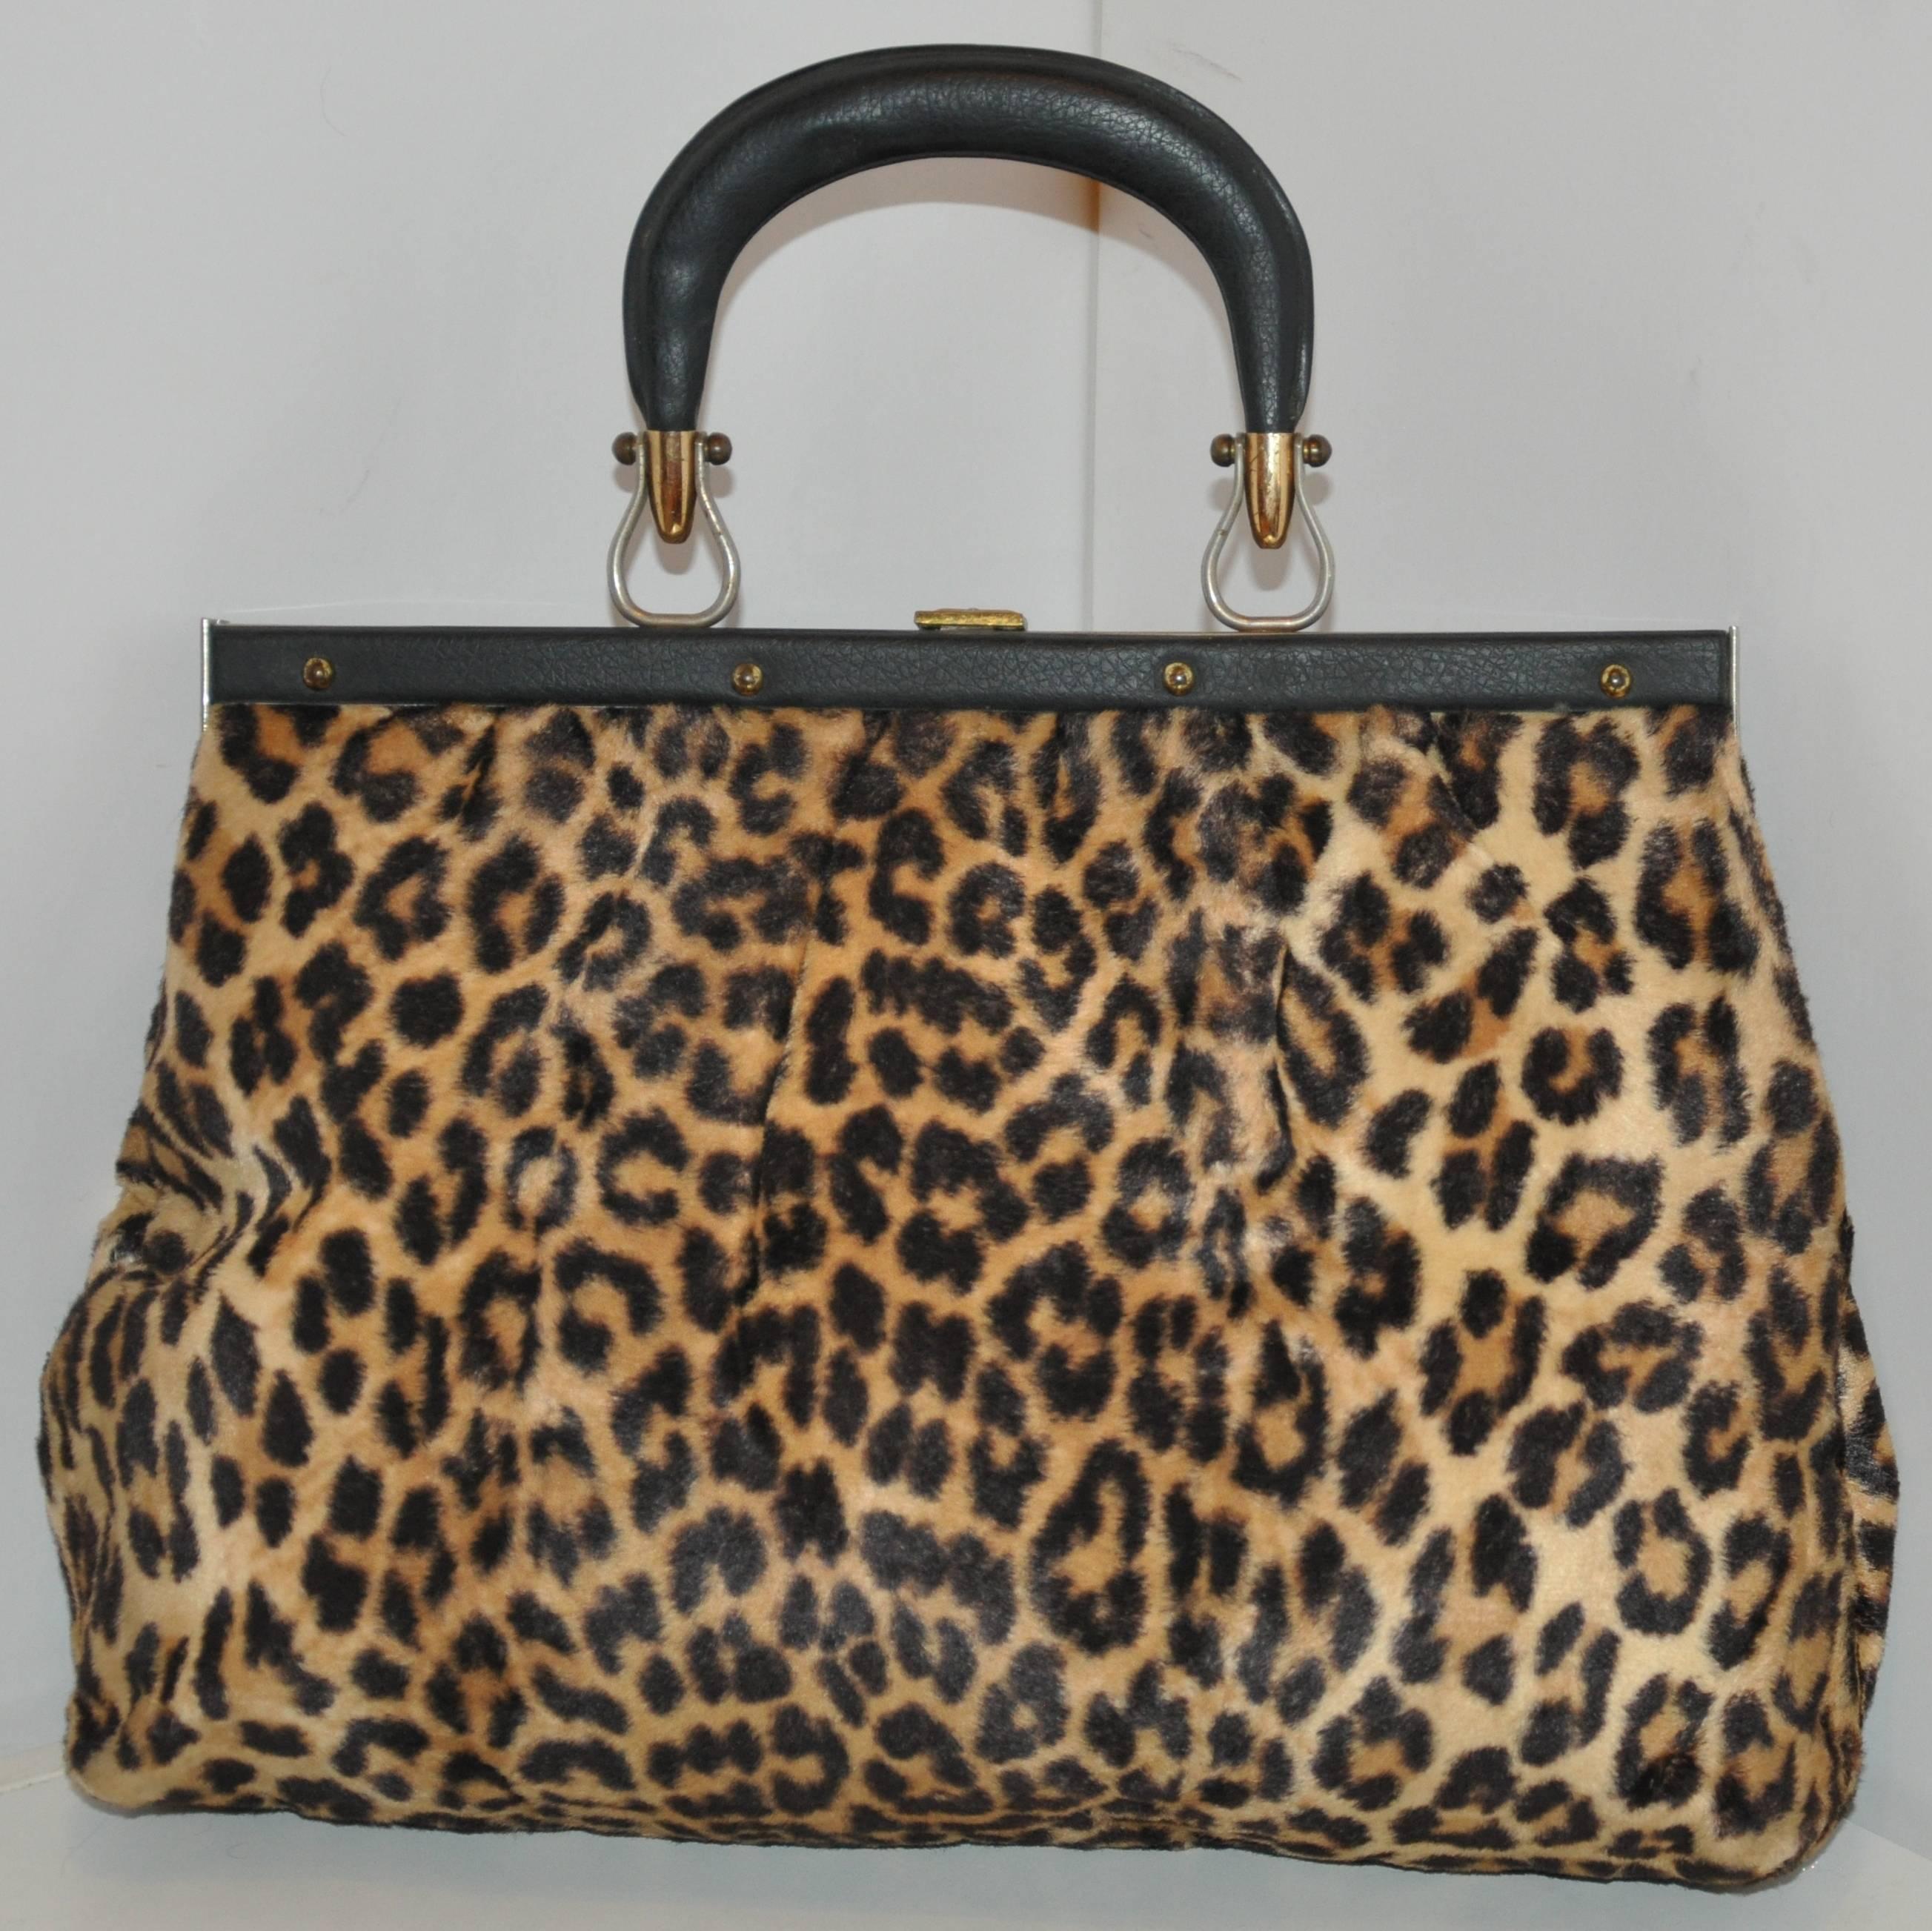 Women's or Men's Ronay Huge Gold Hardware Frame with Faux Leopard Fur Tote